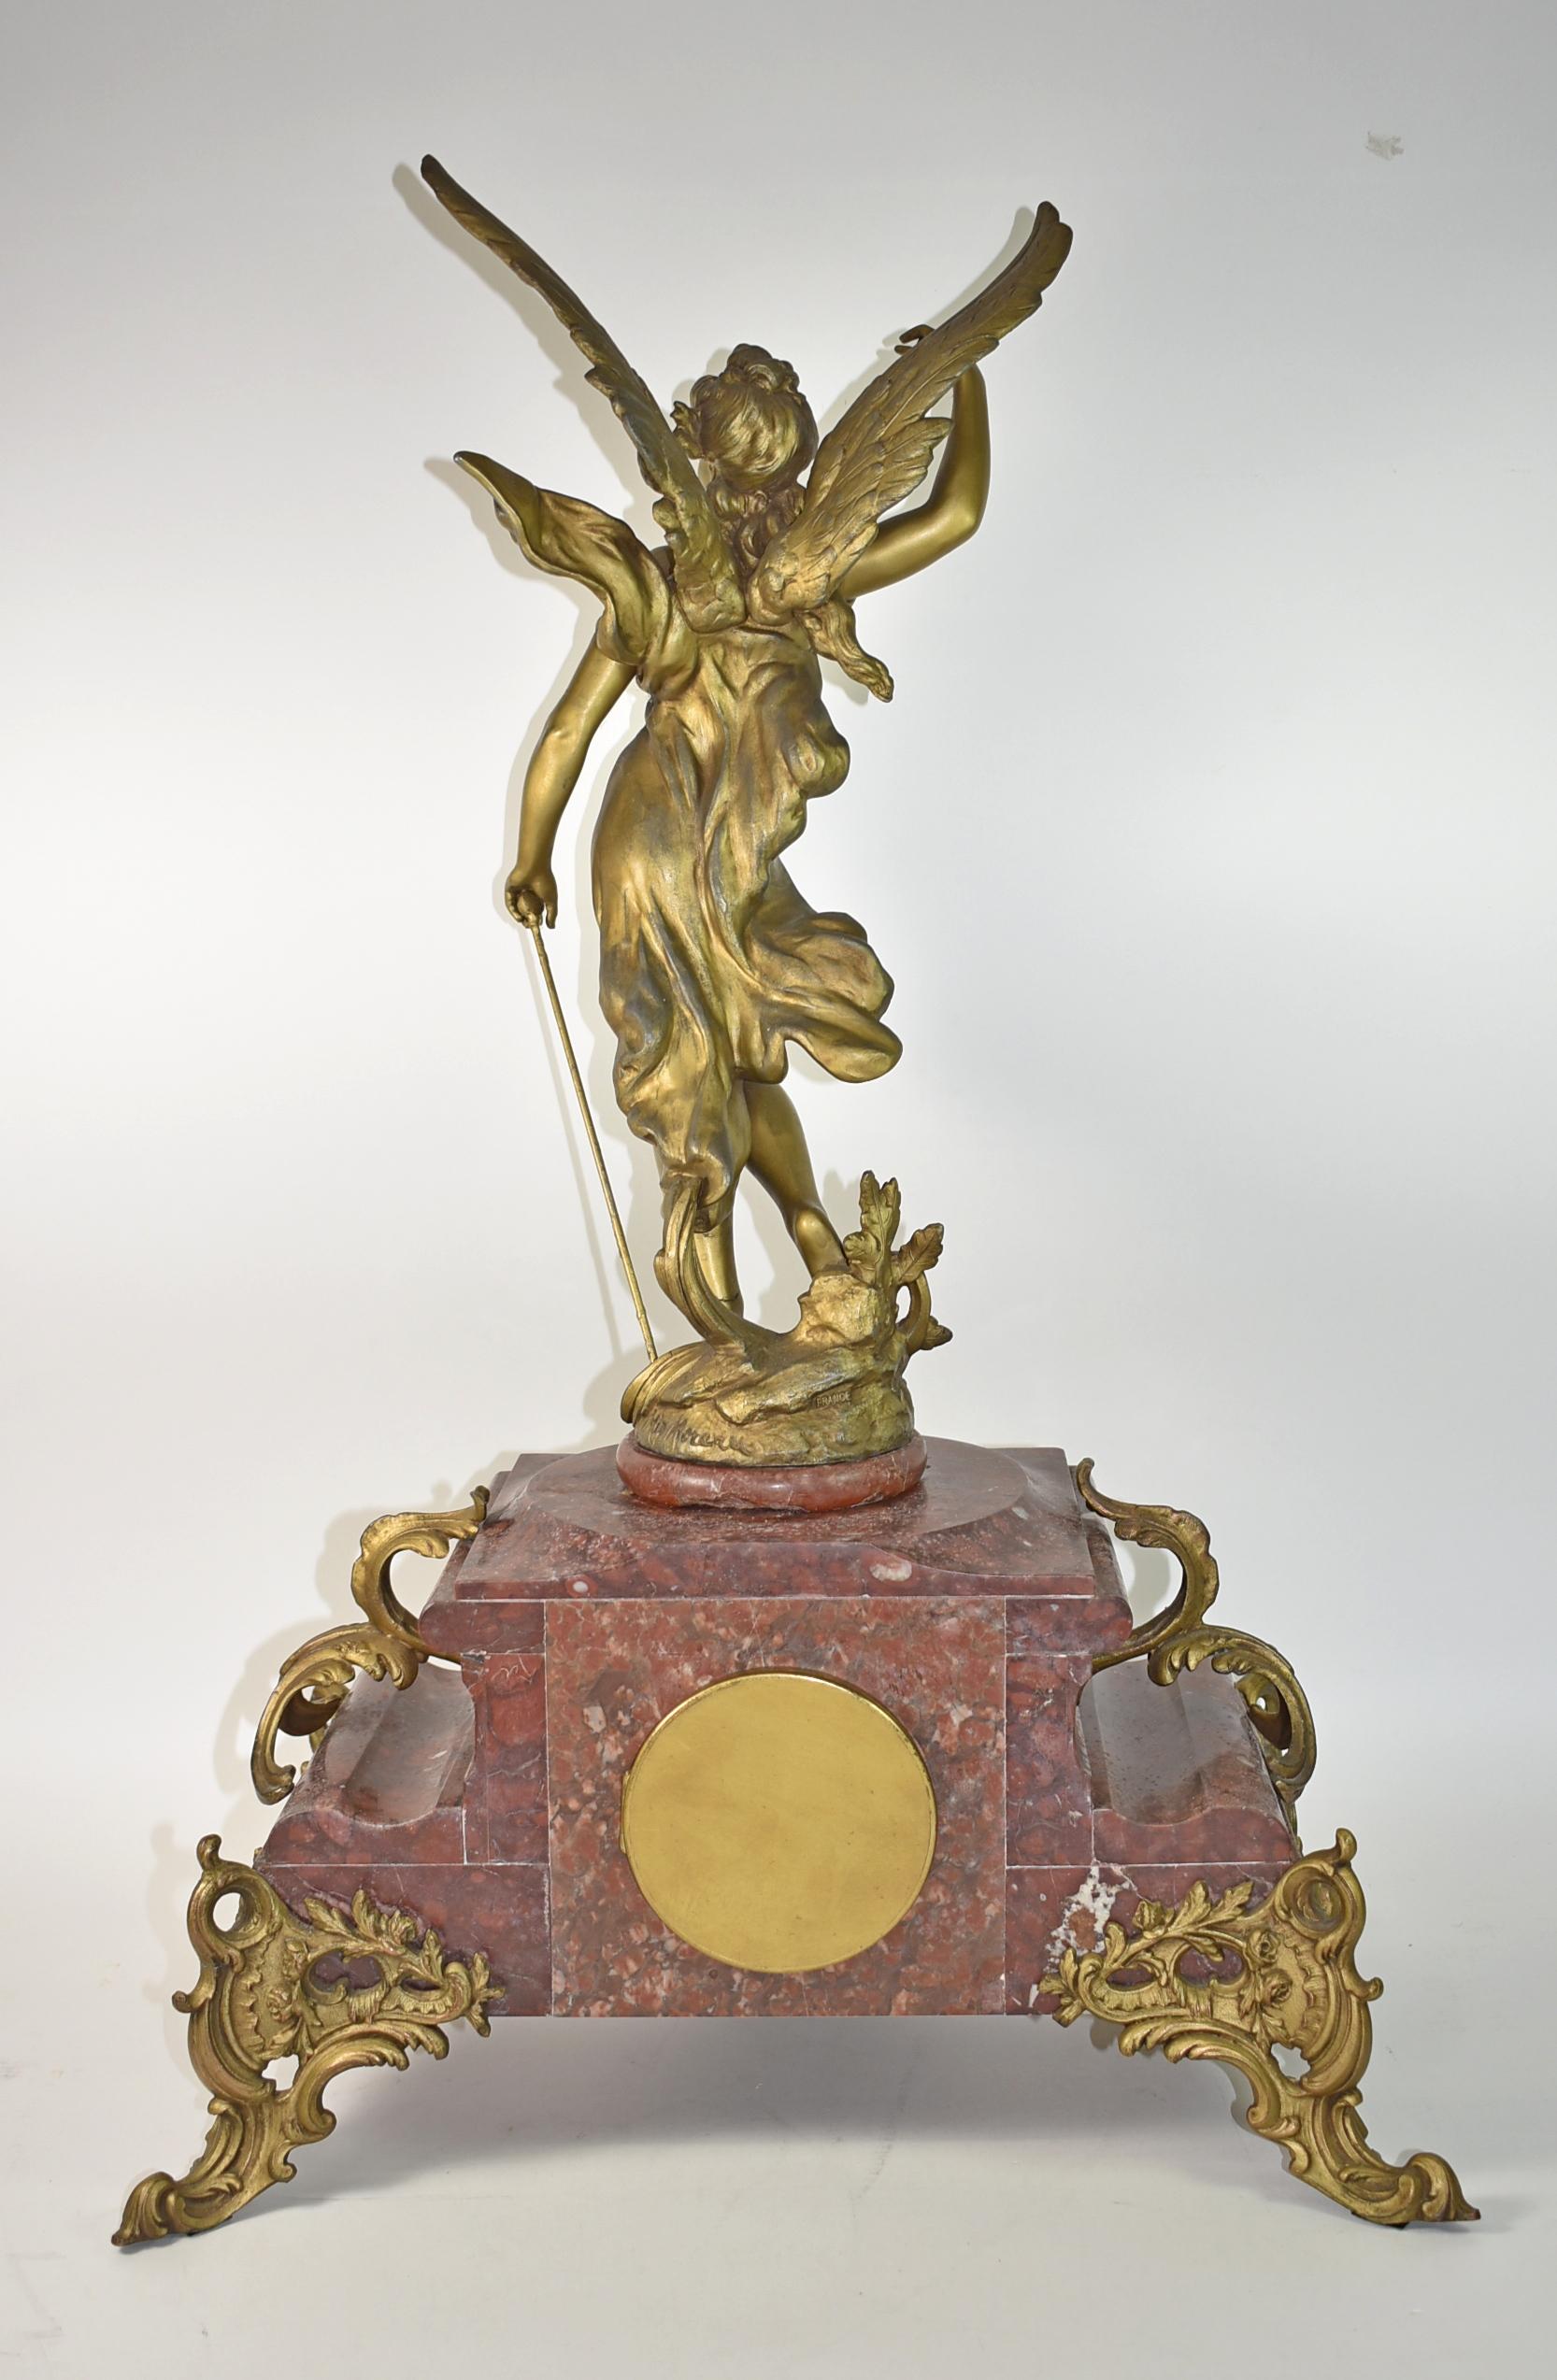 Large French marble figural mantle clock. Hippolyte Francois Moreau (1832-1927) famous for bronze statuettes of young women. Son of Jean Baptiste Moreau. Female angel with her wings spread mounted on a red marble base. Ornate gilded metal mounts and